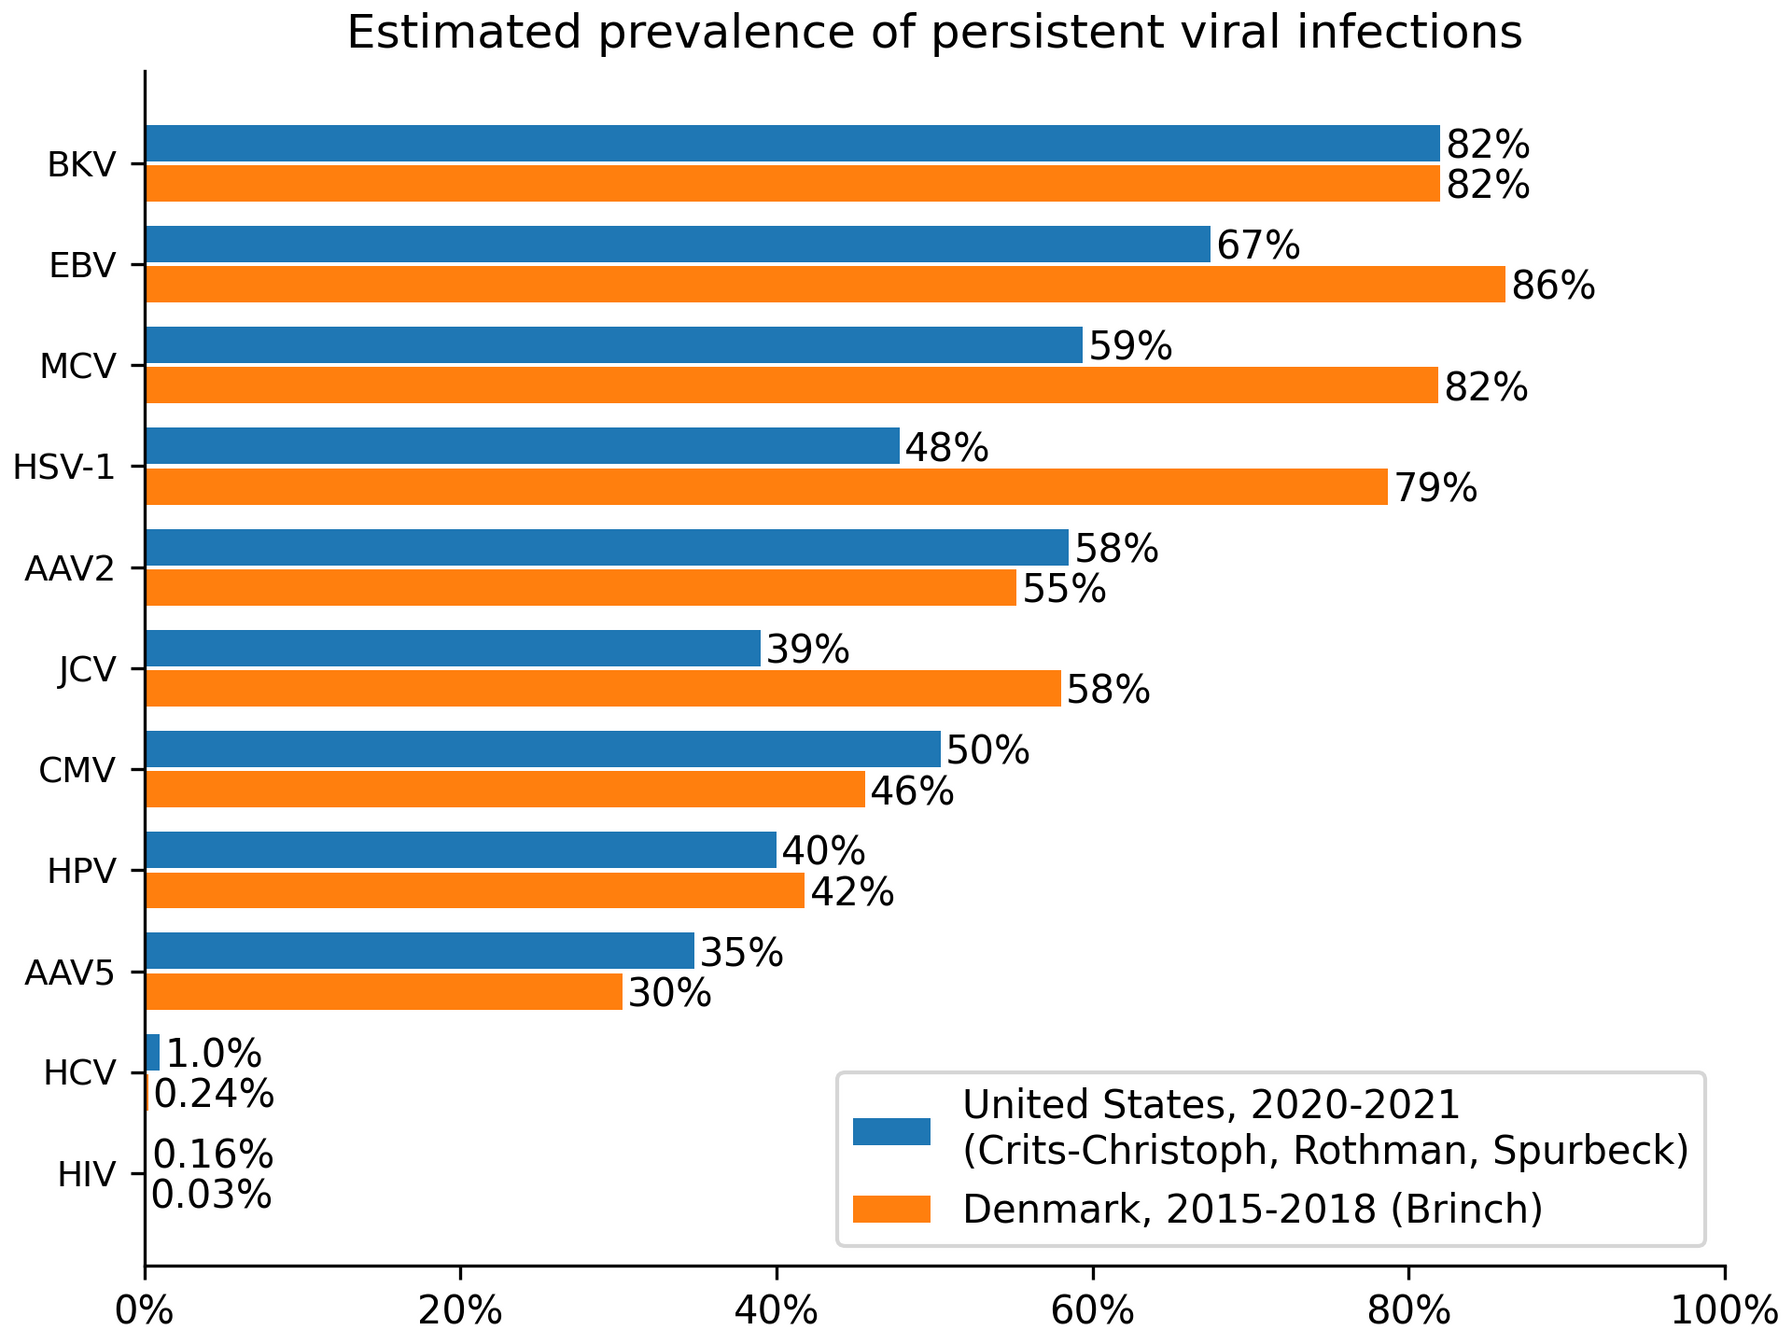 Estimated prevalence for viruses where we collected prevalence data.